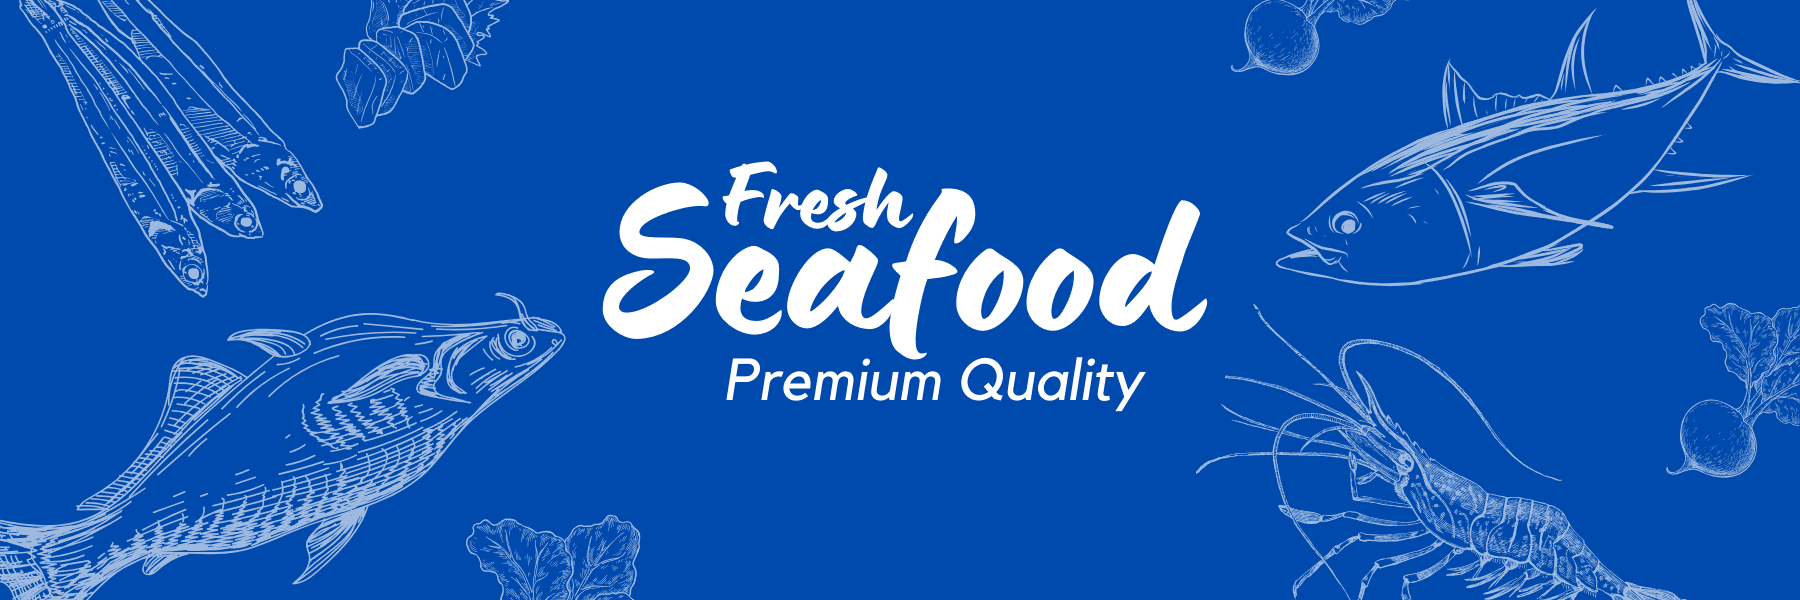 quality seafood nghi son foods group